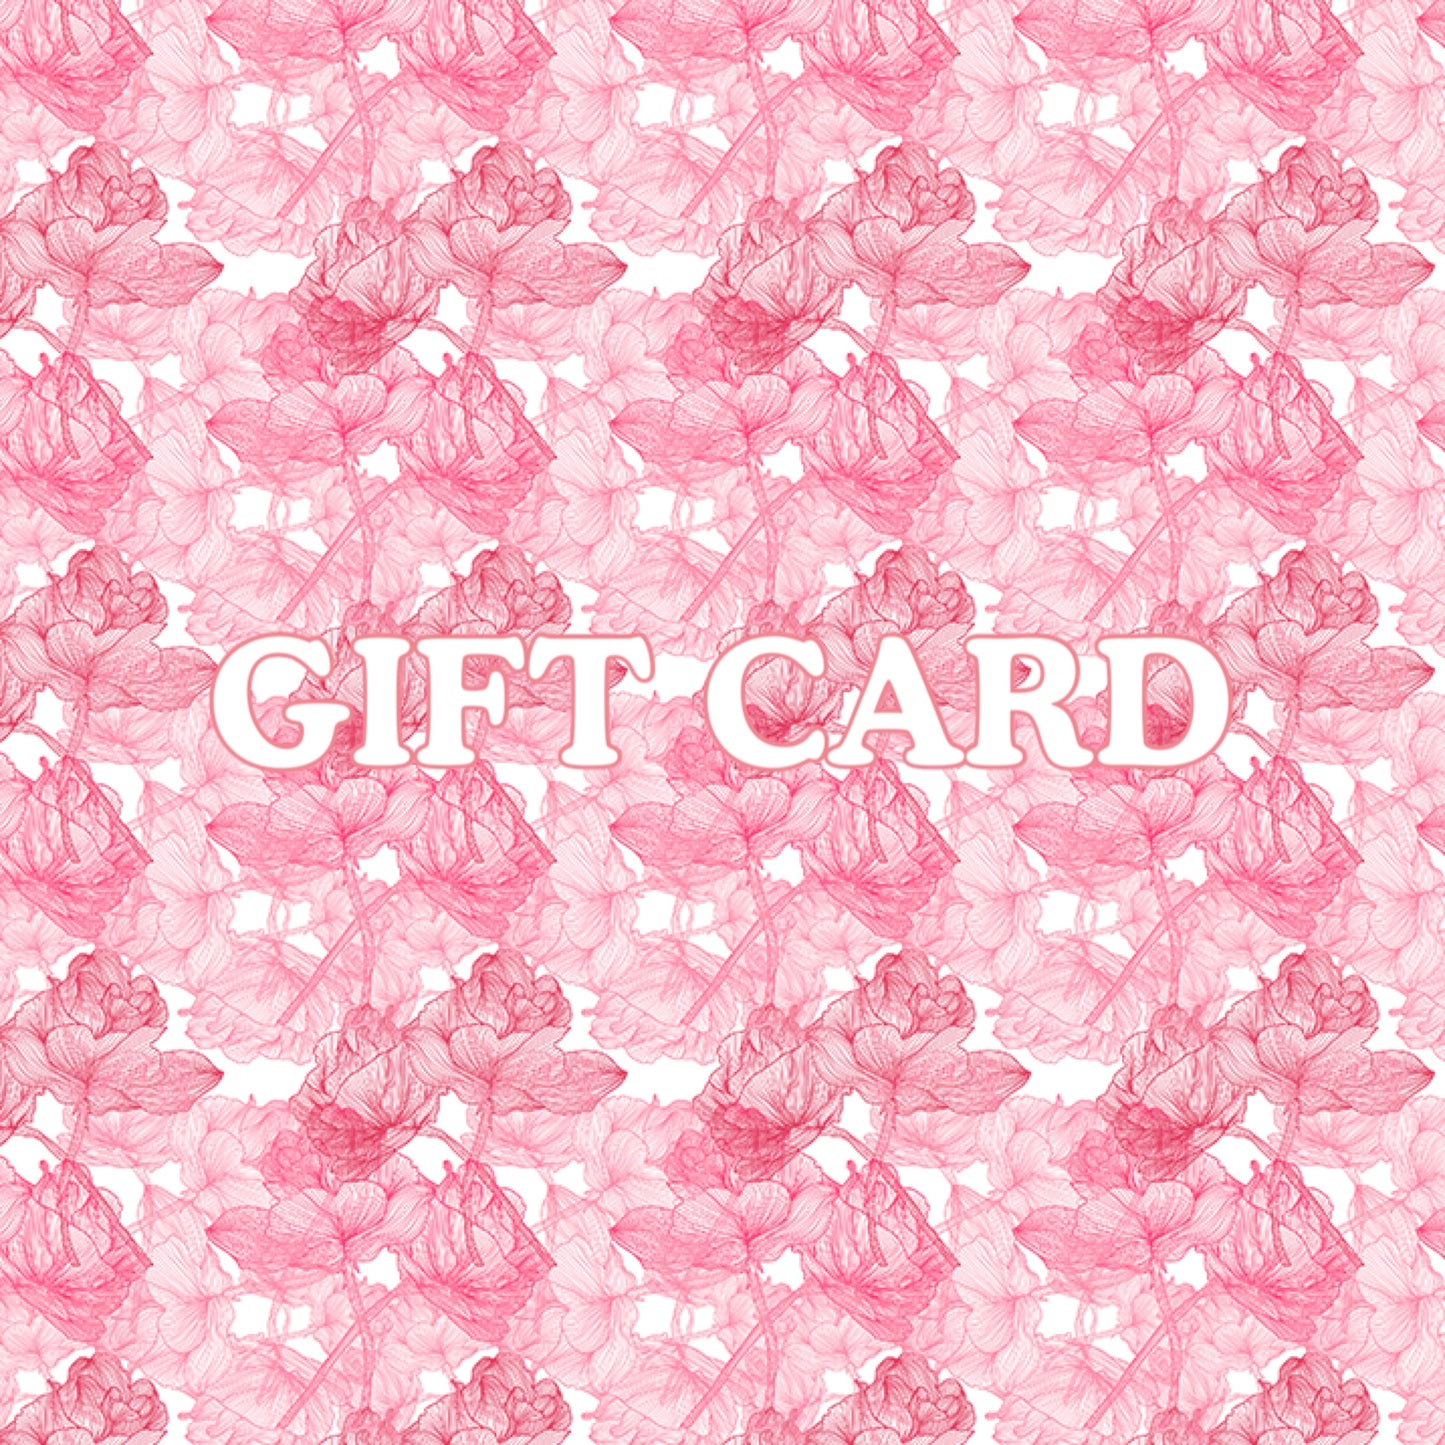 Dimples & Daffodils store gift card